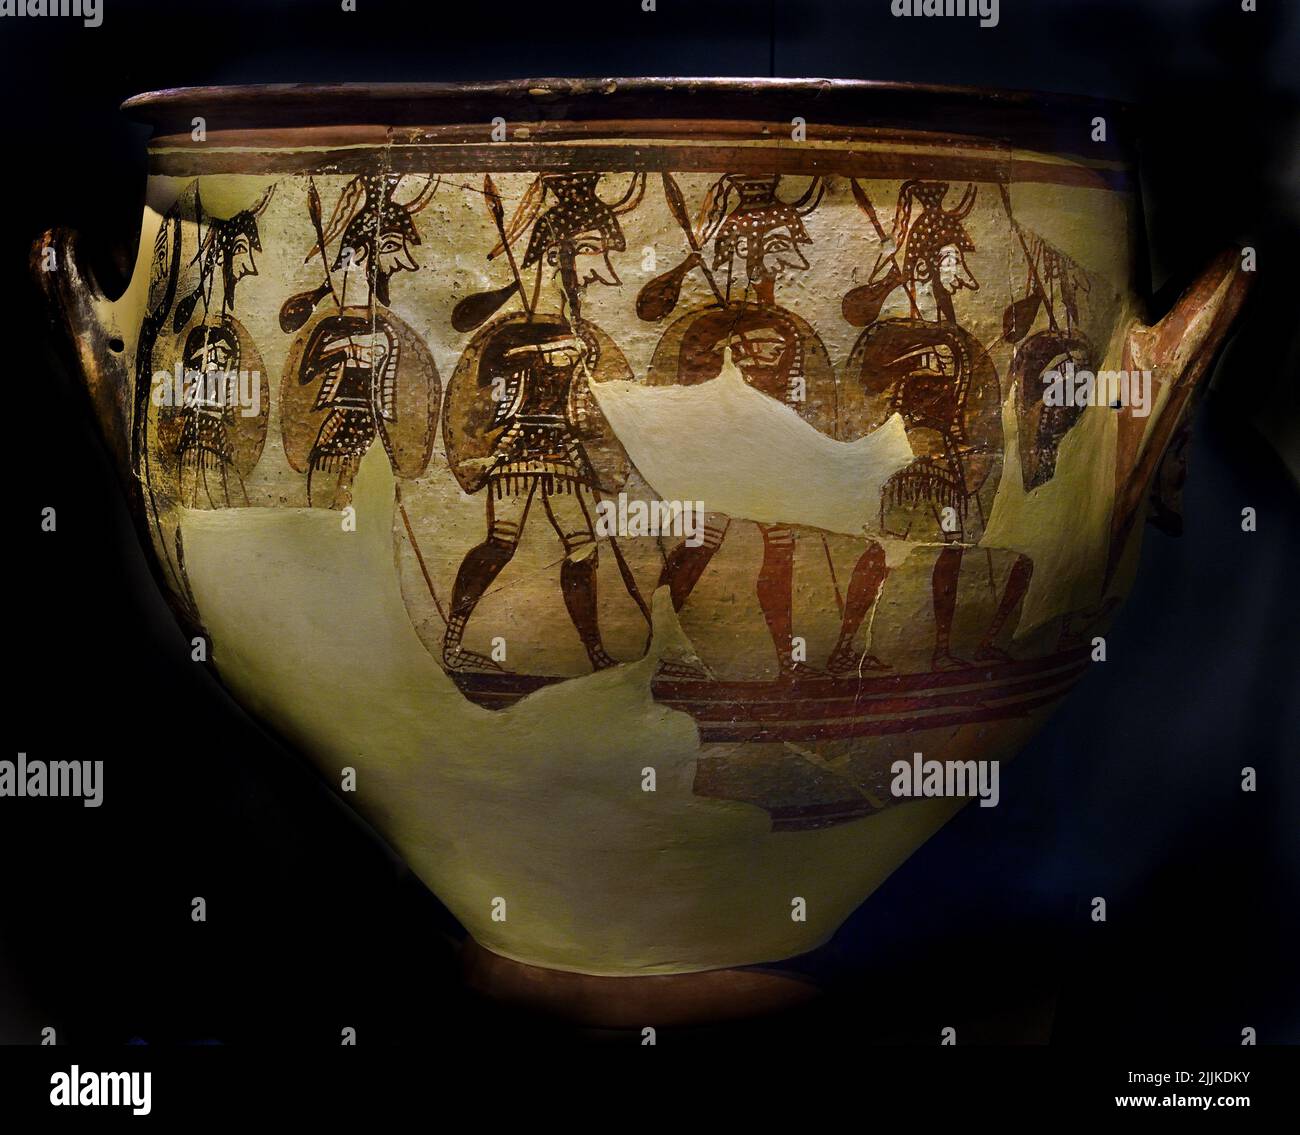 Marching soldiers on the Warrior Vase, , Large krater depicting men in full armour. ‘House of the Warrior krater’, Mycenae acropolis. 12th century BC, Mycenaean Greece , Mycenaean civilization, Bronze Age in Ancient Greece 1750 to 1050 BC, Mycenae, National Archaeological Museum in Athens. Stock Photo